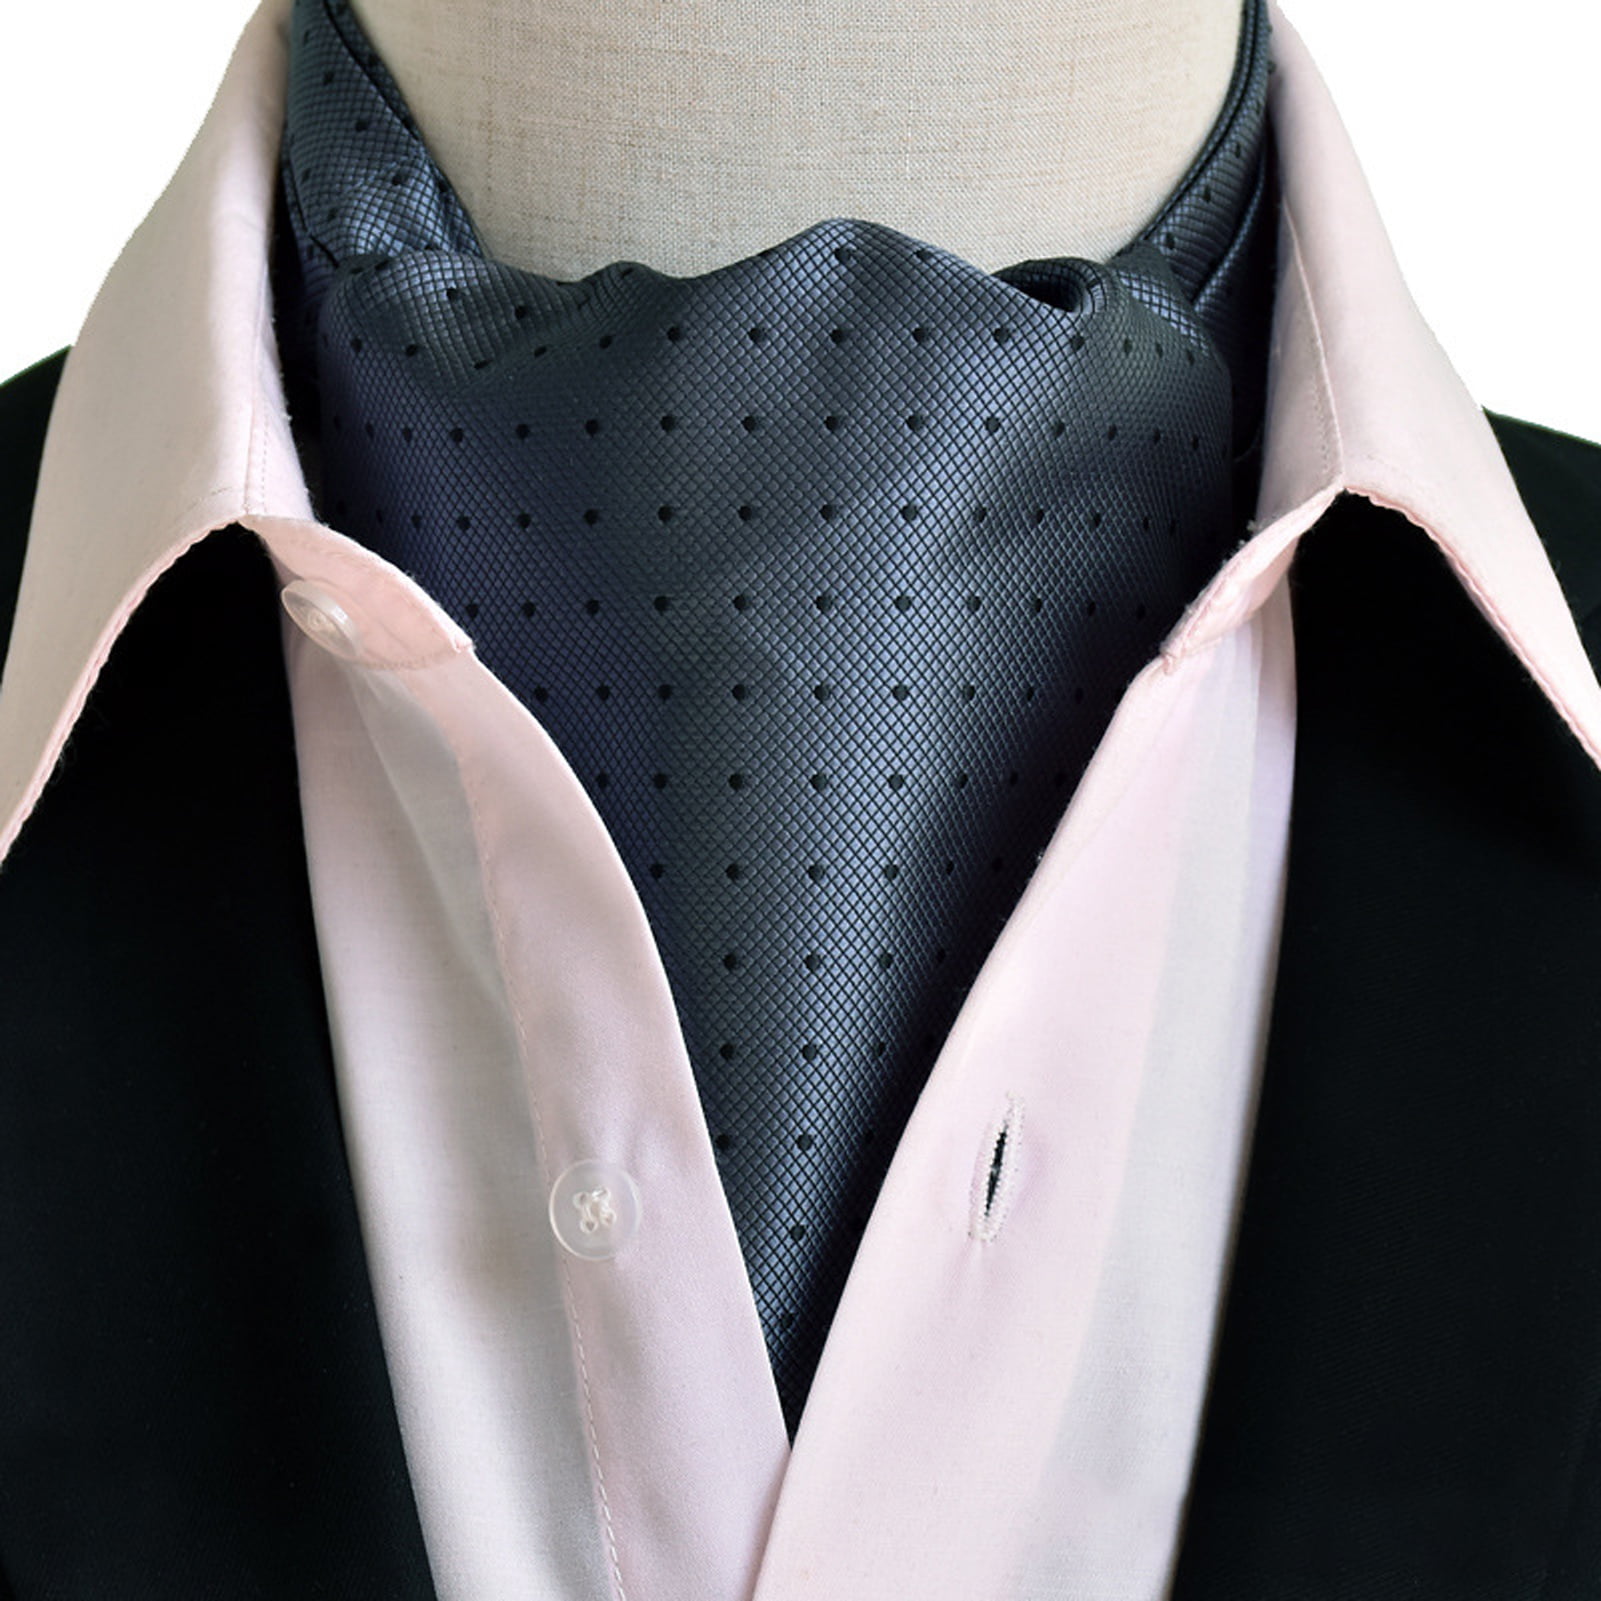 Mens Dickie Bow Tie Two Tone double Layer Formal Shirt Wedding Prom UK Gift 